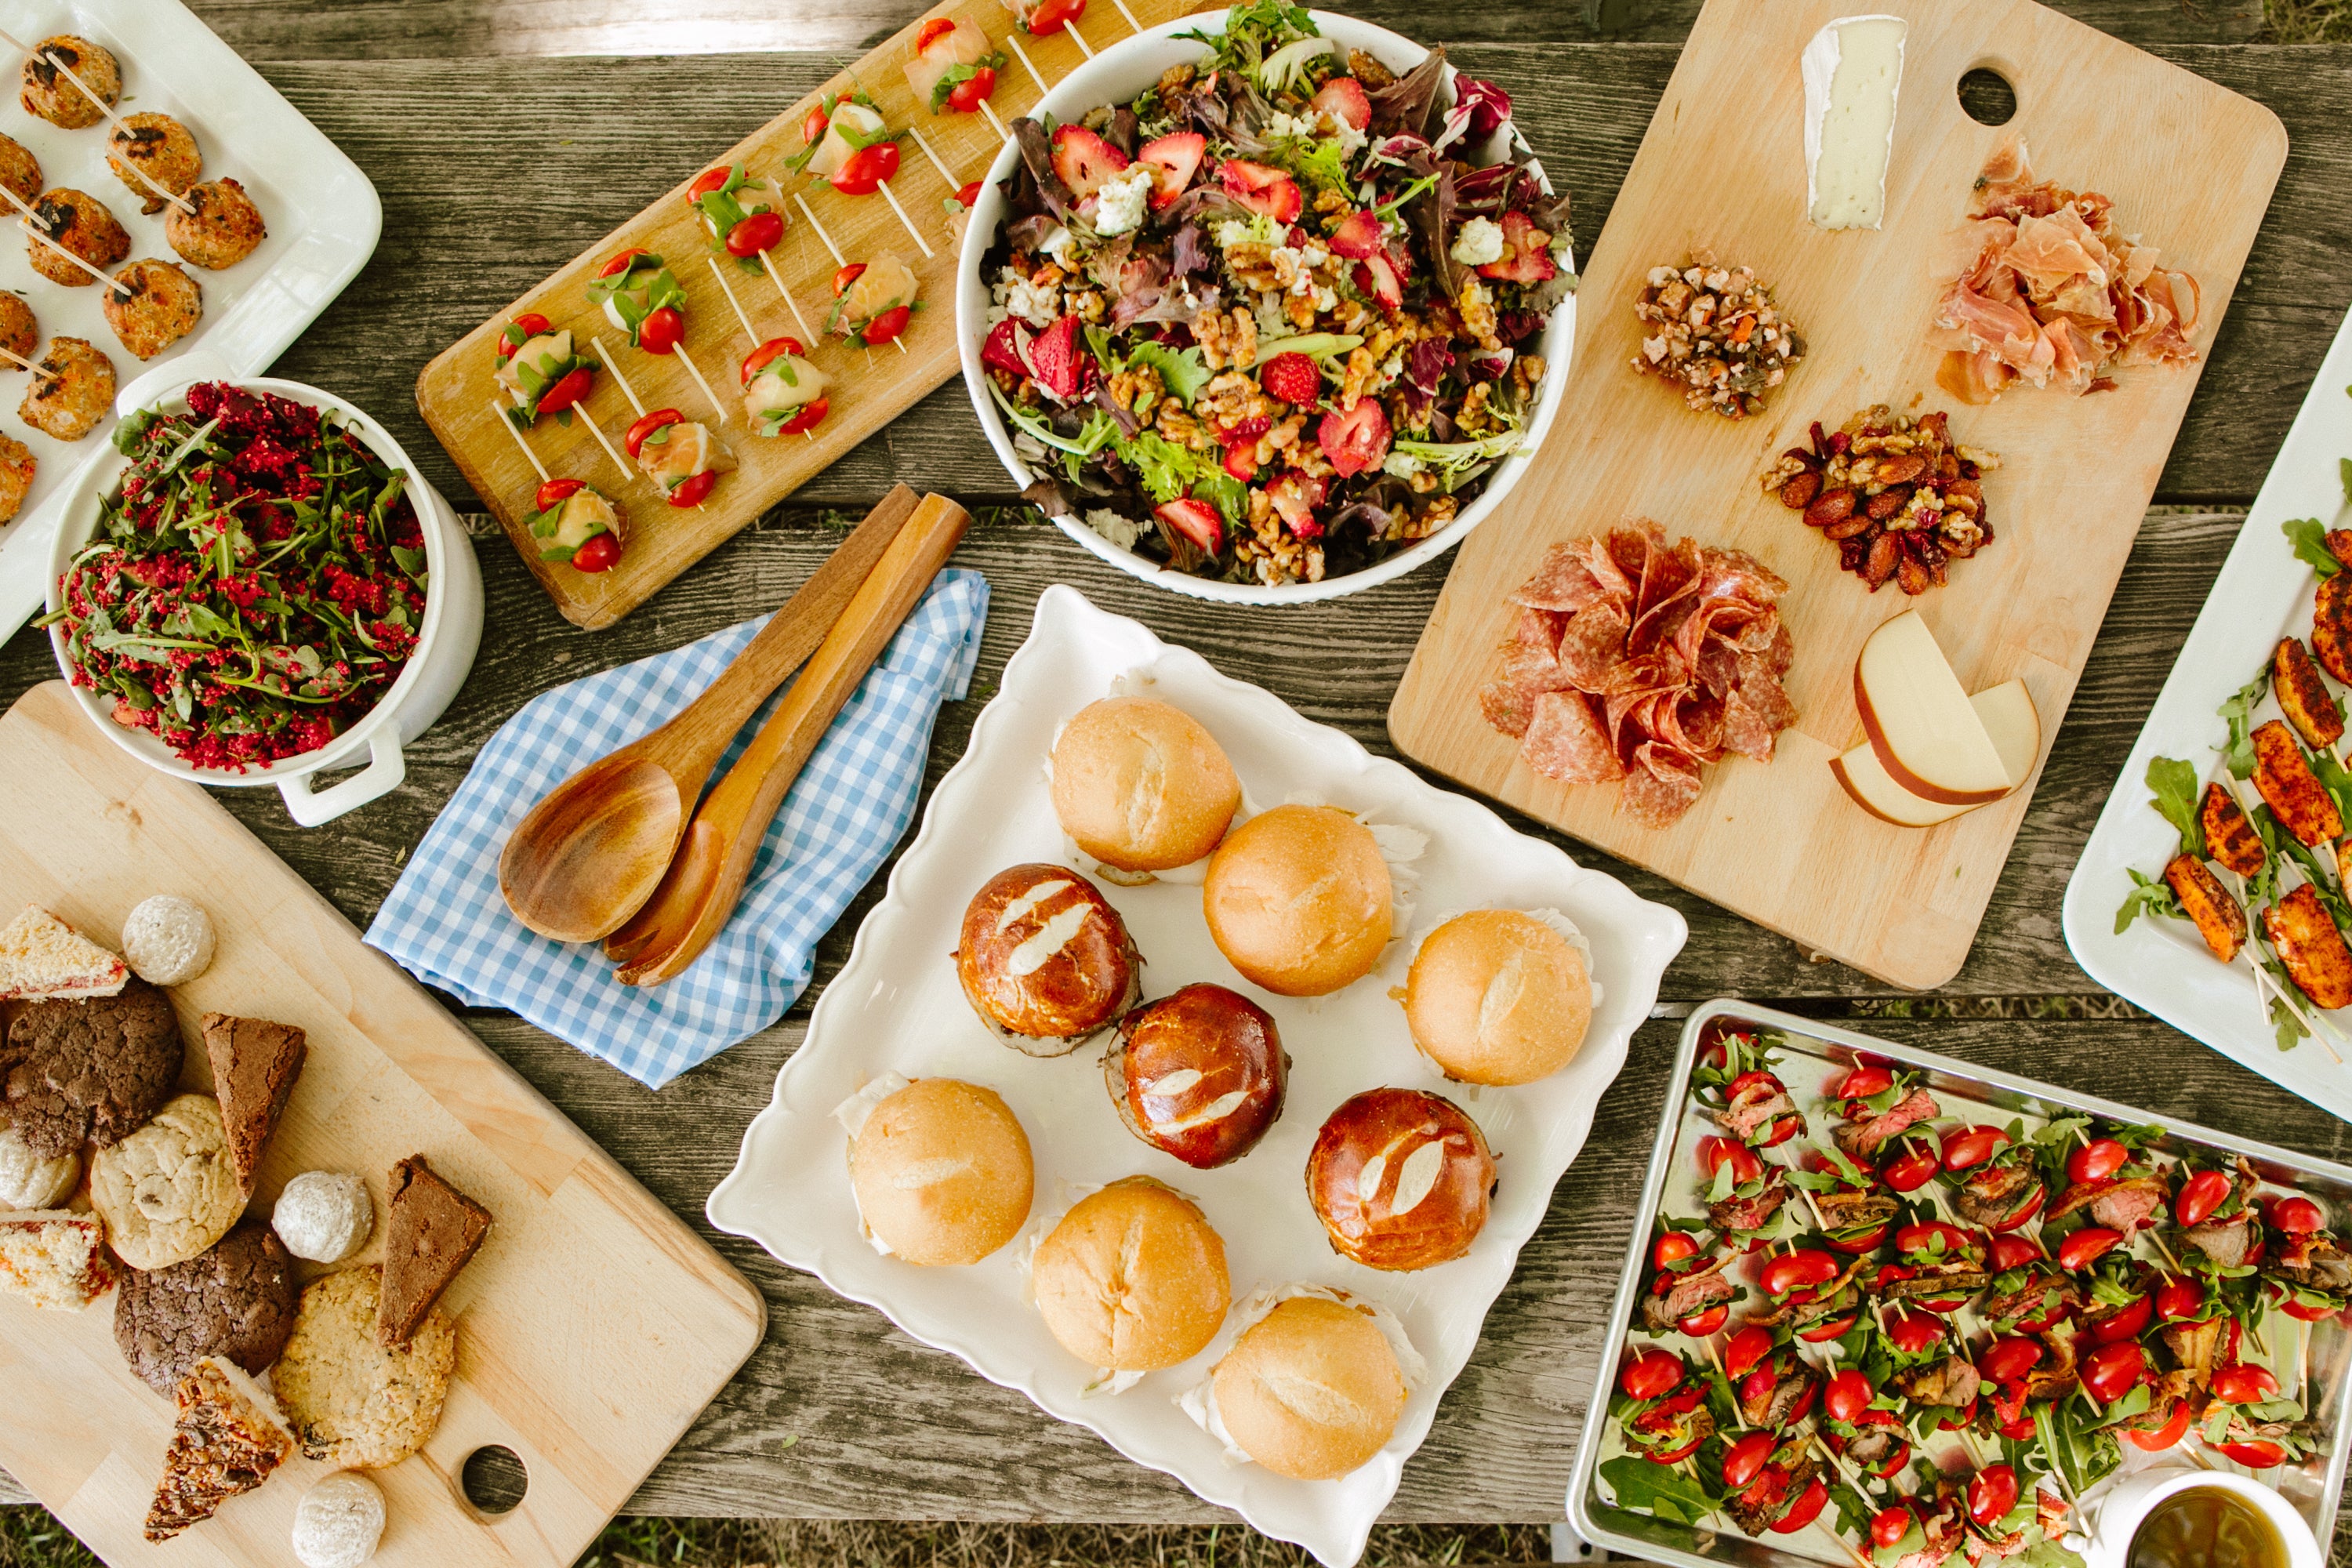 Where to Pick Up the Best Picnic Boxes in Los Angeles